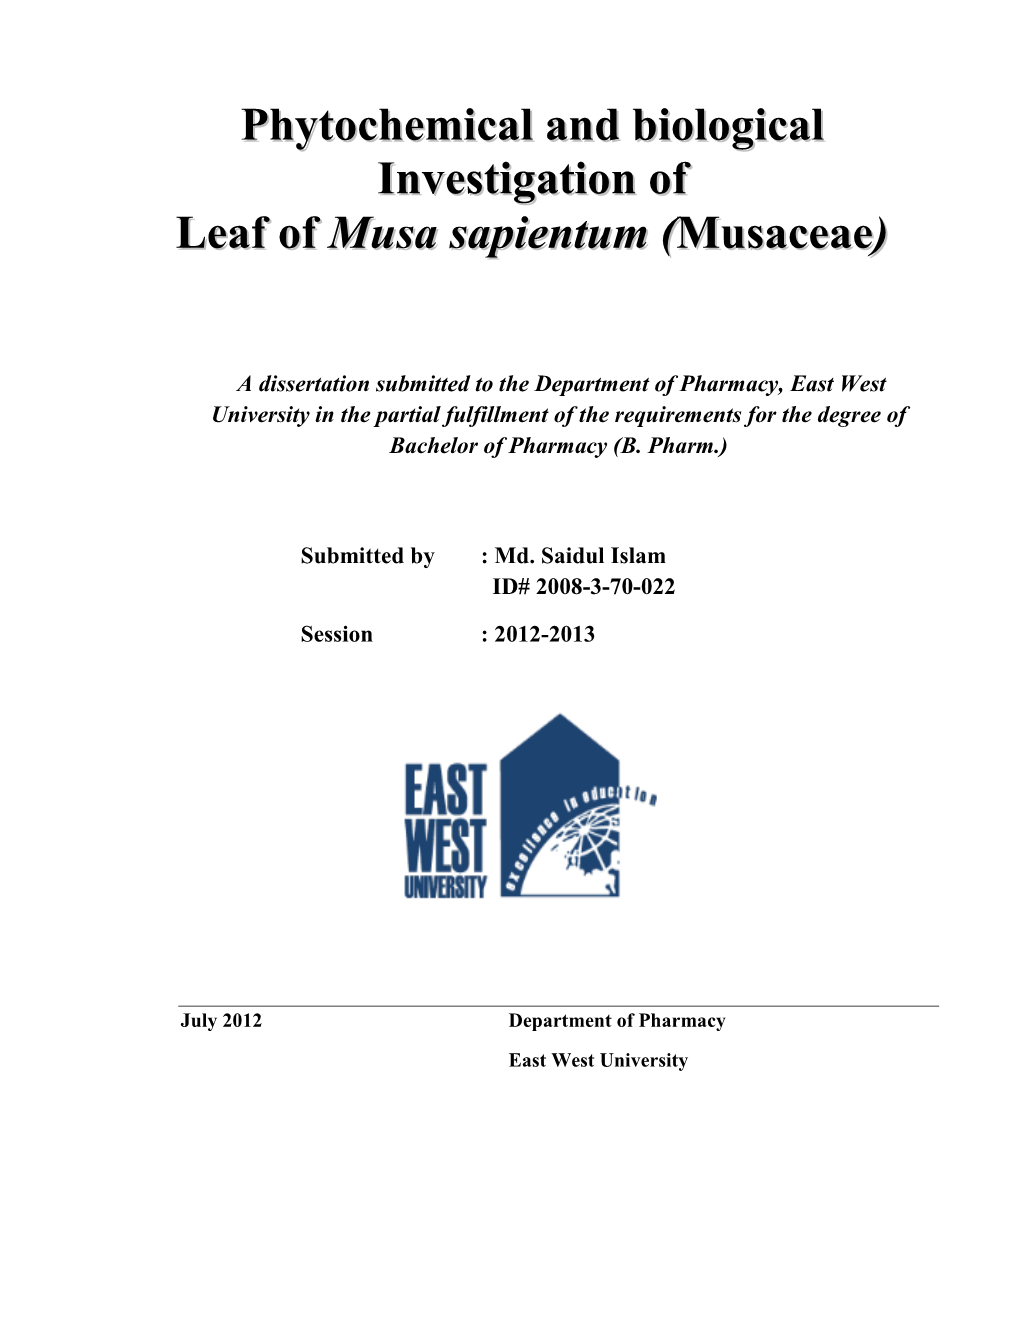 Phytochemical and Biological Investigation of Leaf of Musa